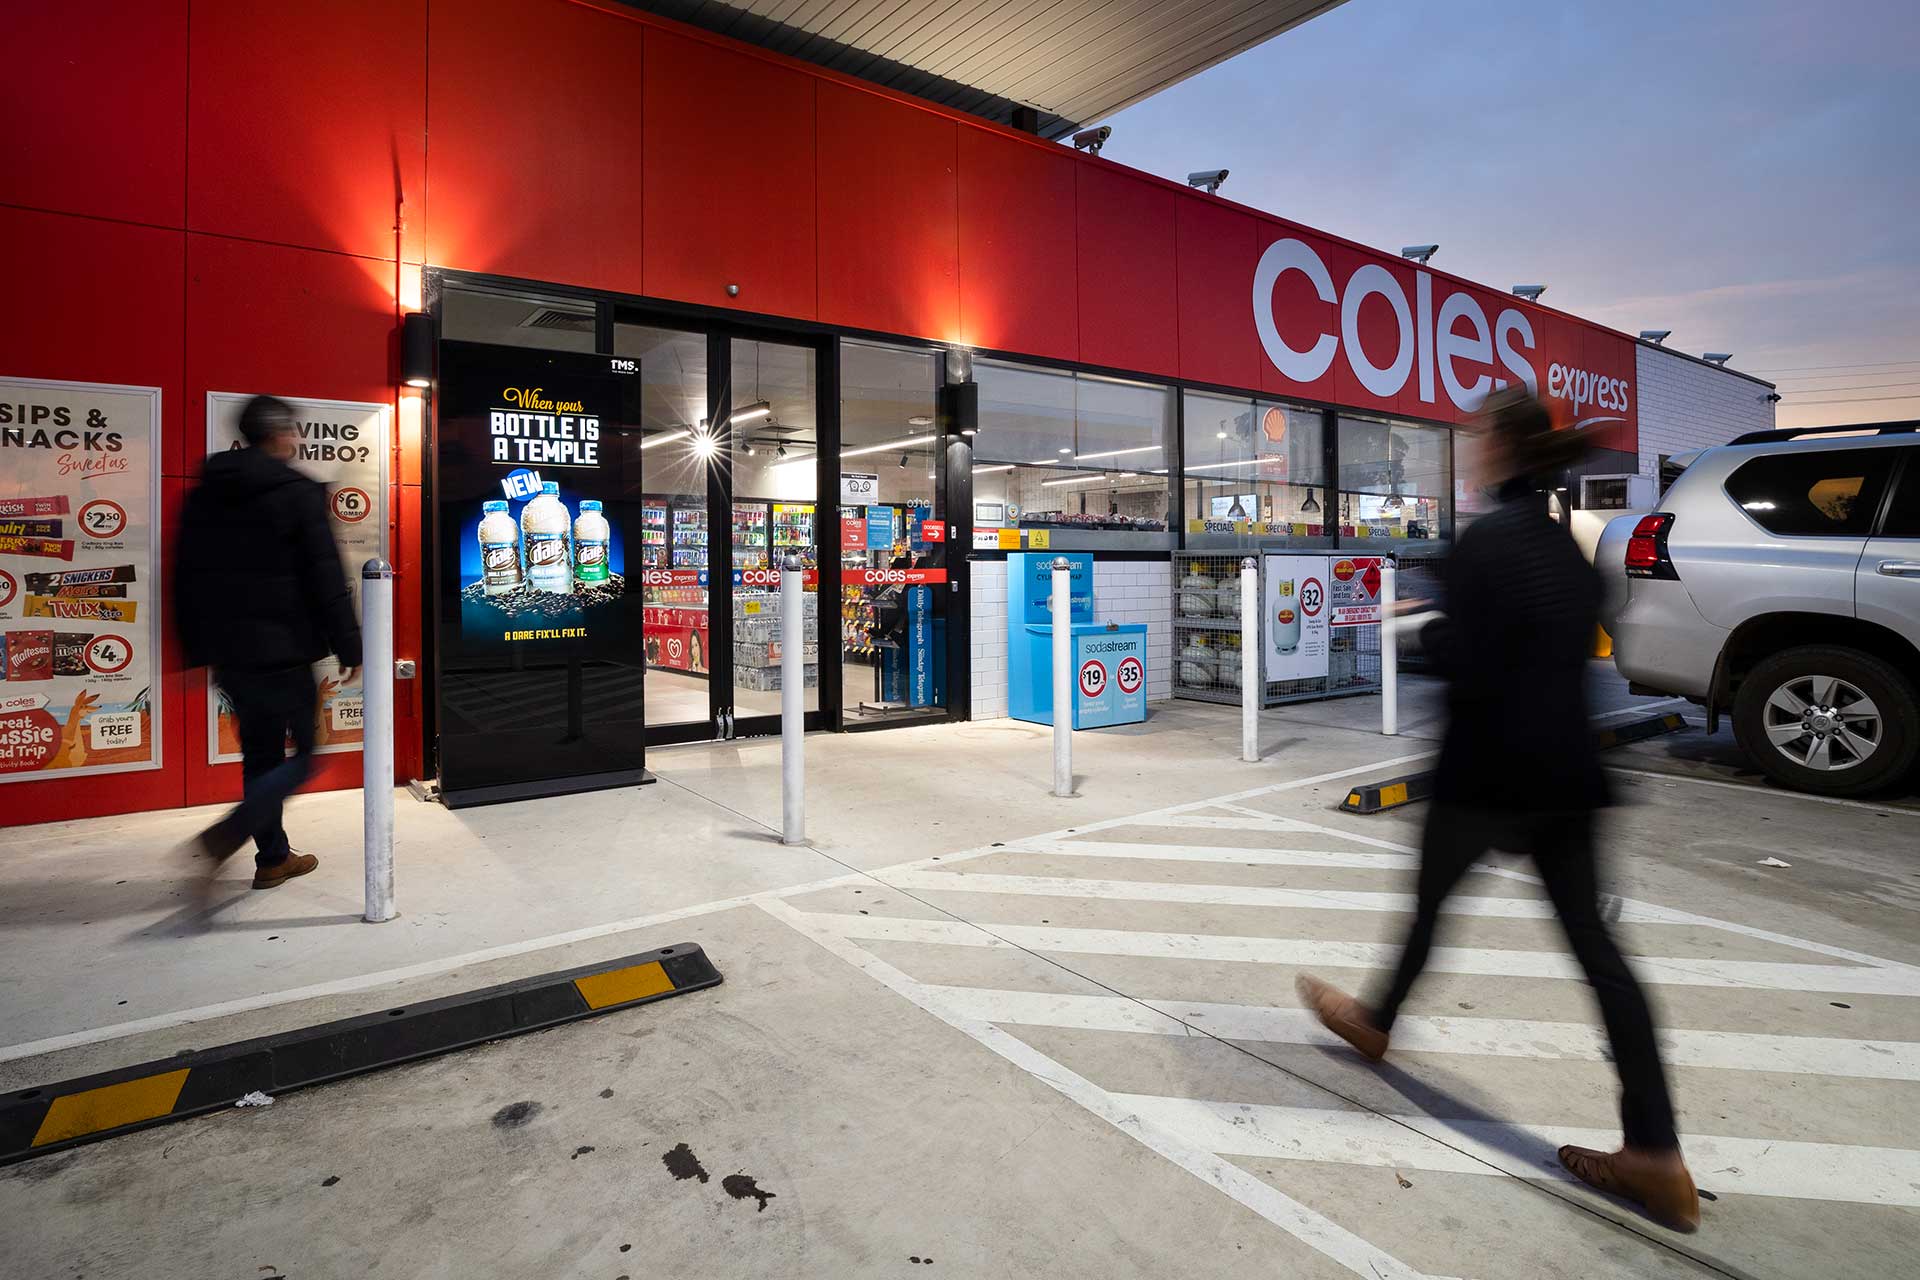 Digital advertising banner outside Coles Express service station entrance with people entering